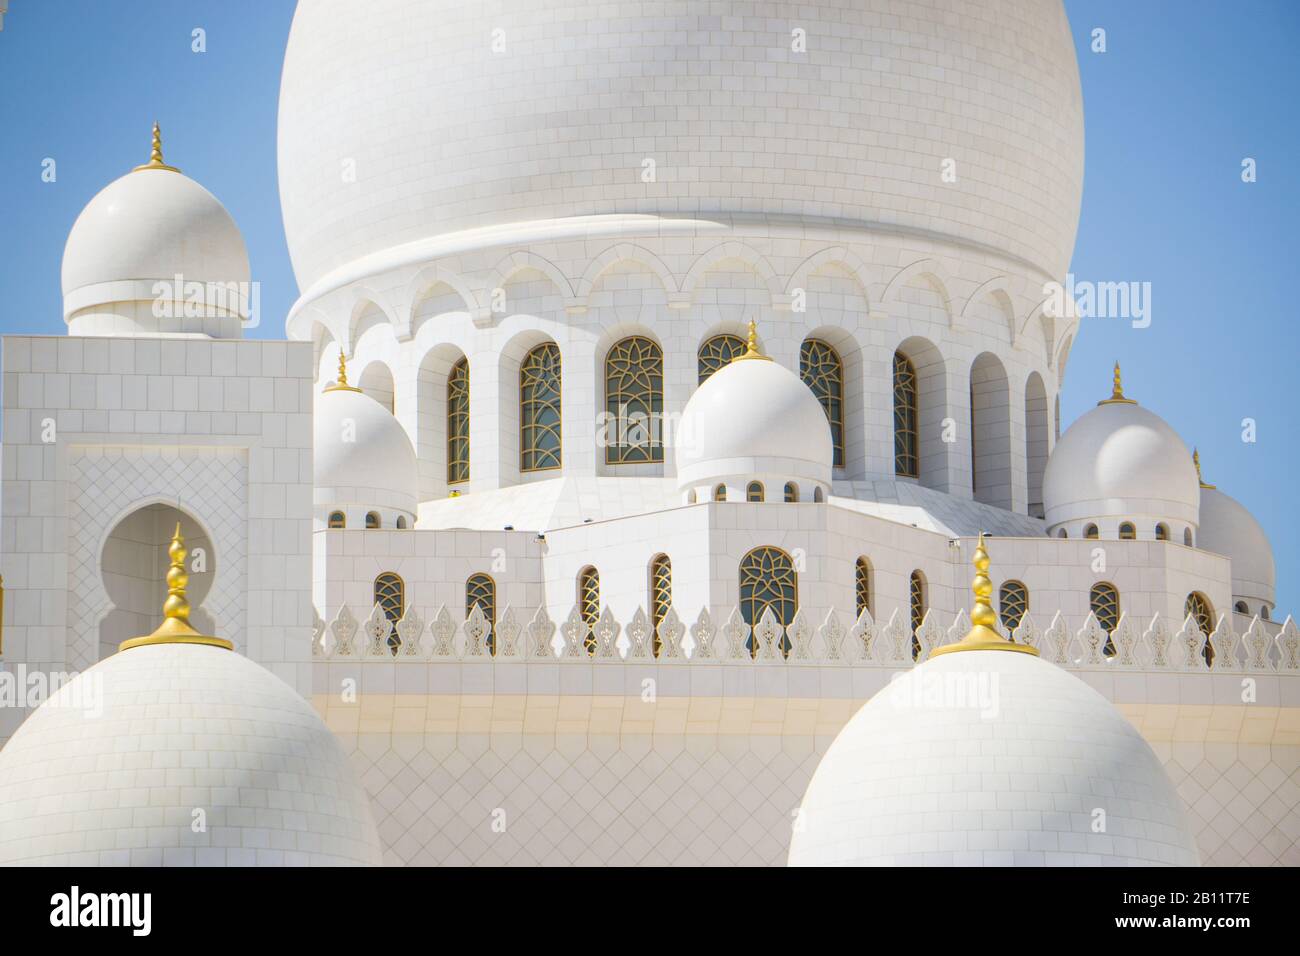 White marble arches and domes of the Sheikh Zayed Grand Mosque, Abu Dhabi. Stock Photo